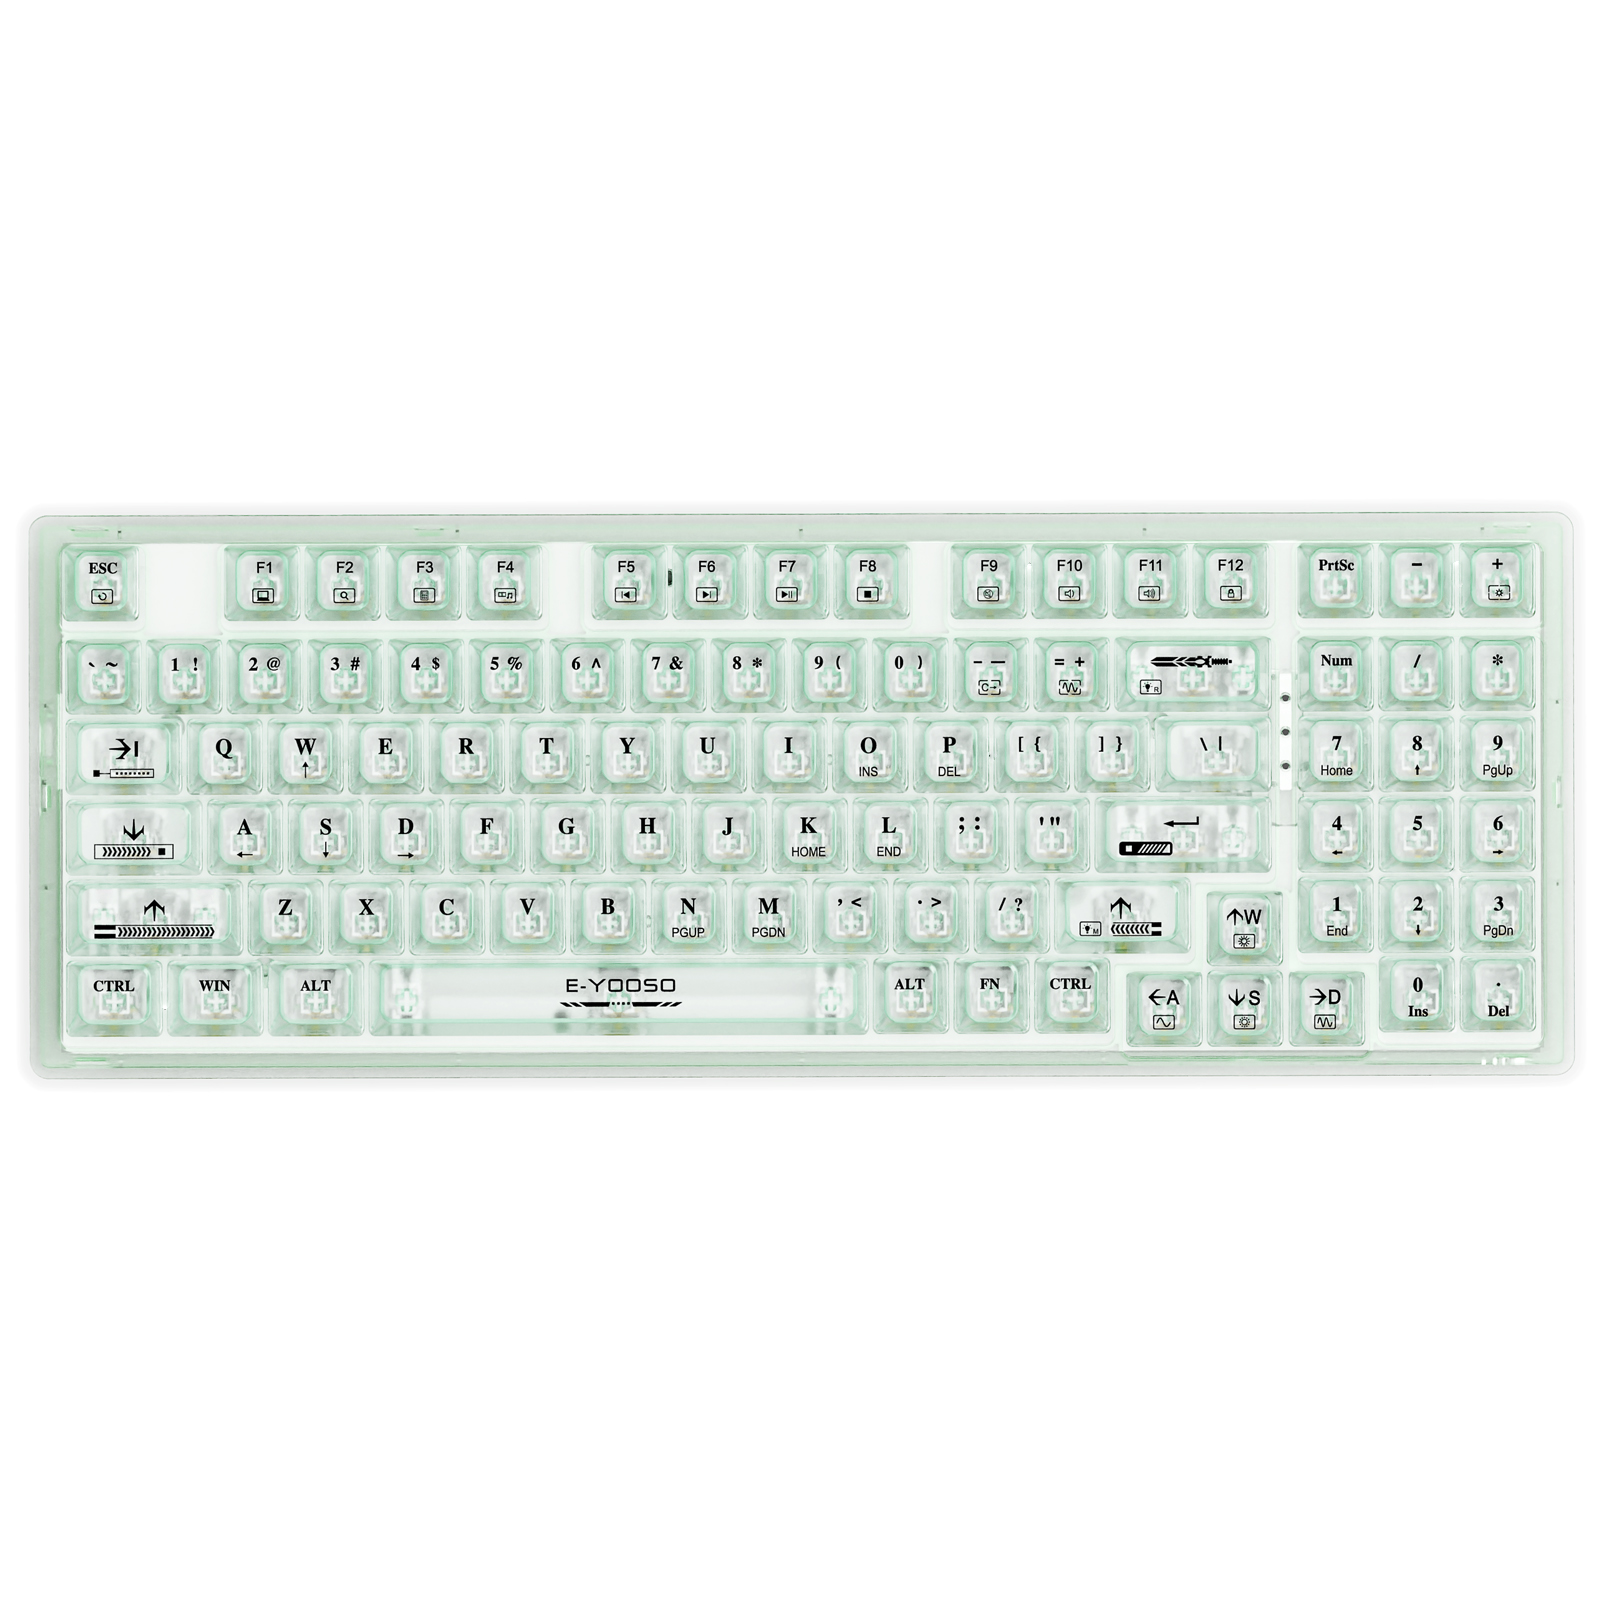 Z94 95% Gaming Keyboard Transparent PBT Keycaps,94 Keys Red Switch USB Wired Mechanical Keyboard with RGB Side Light